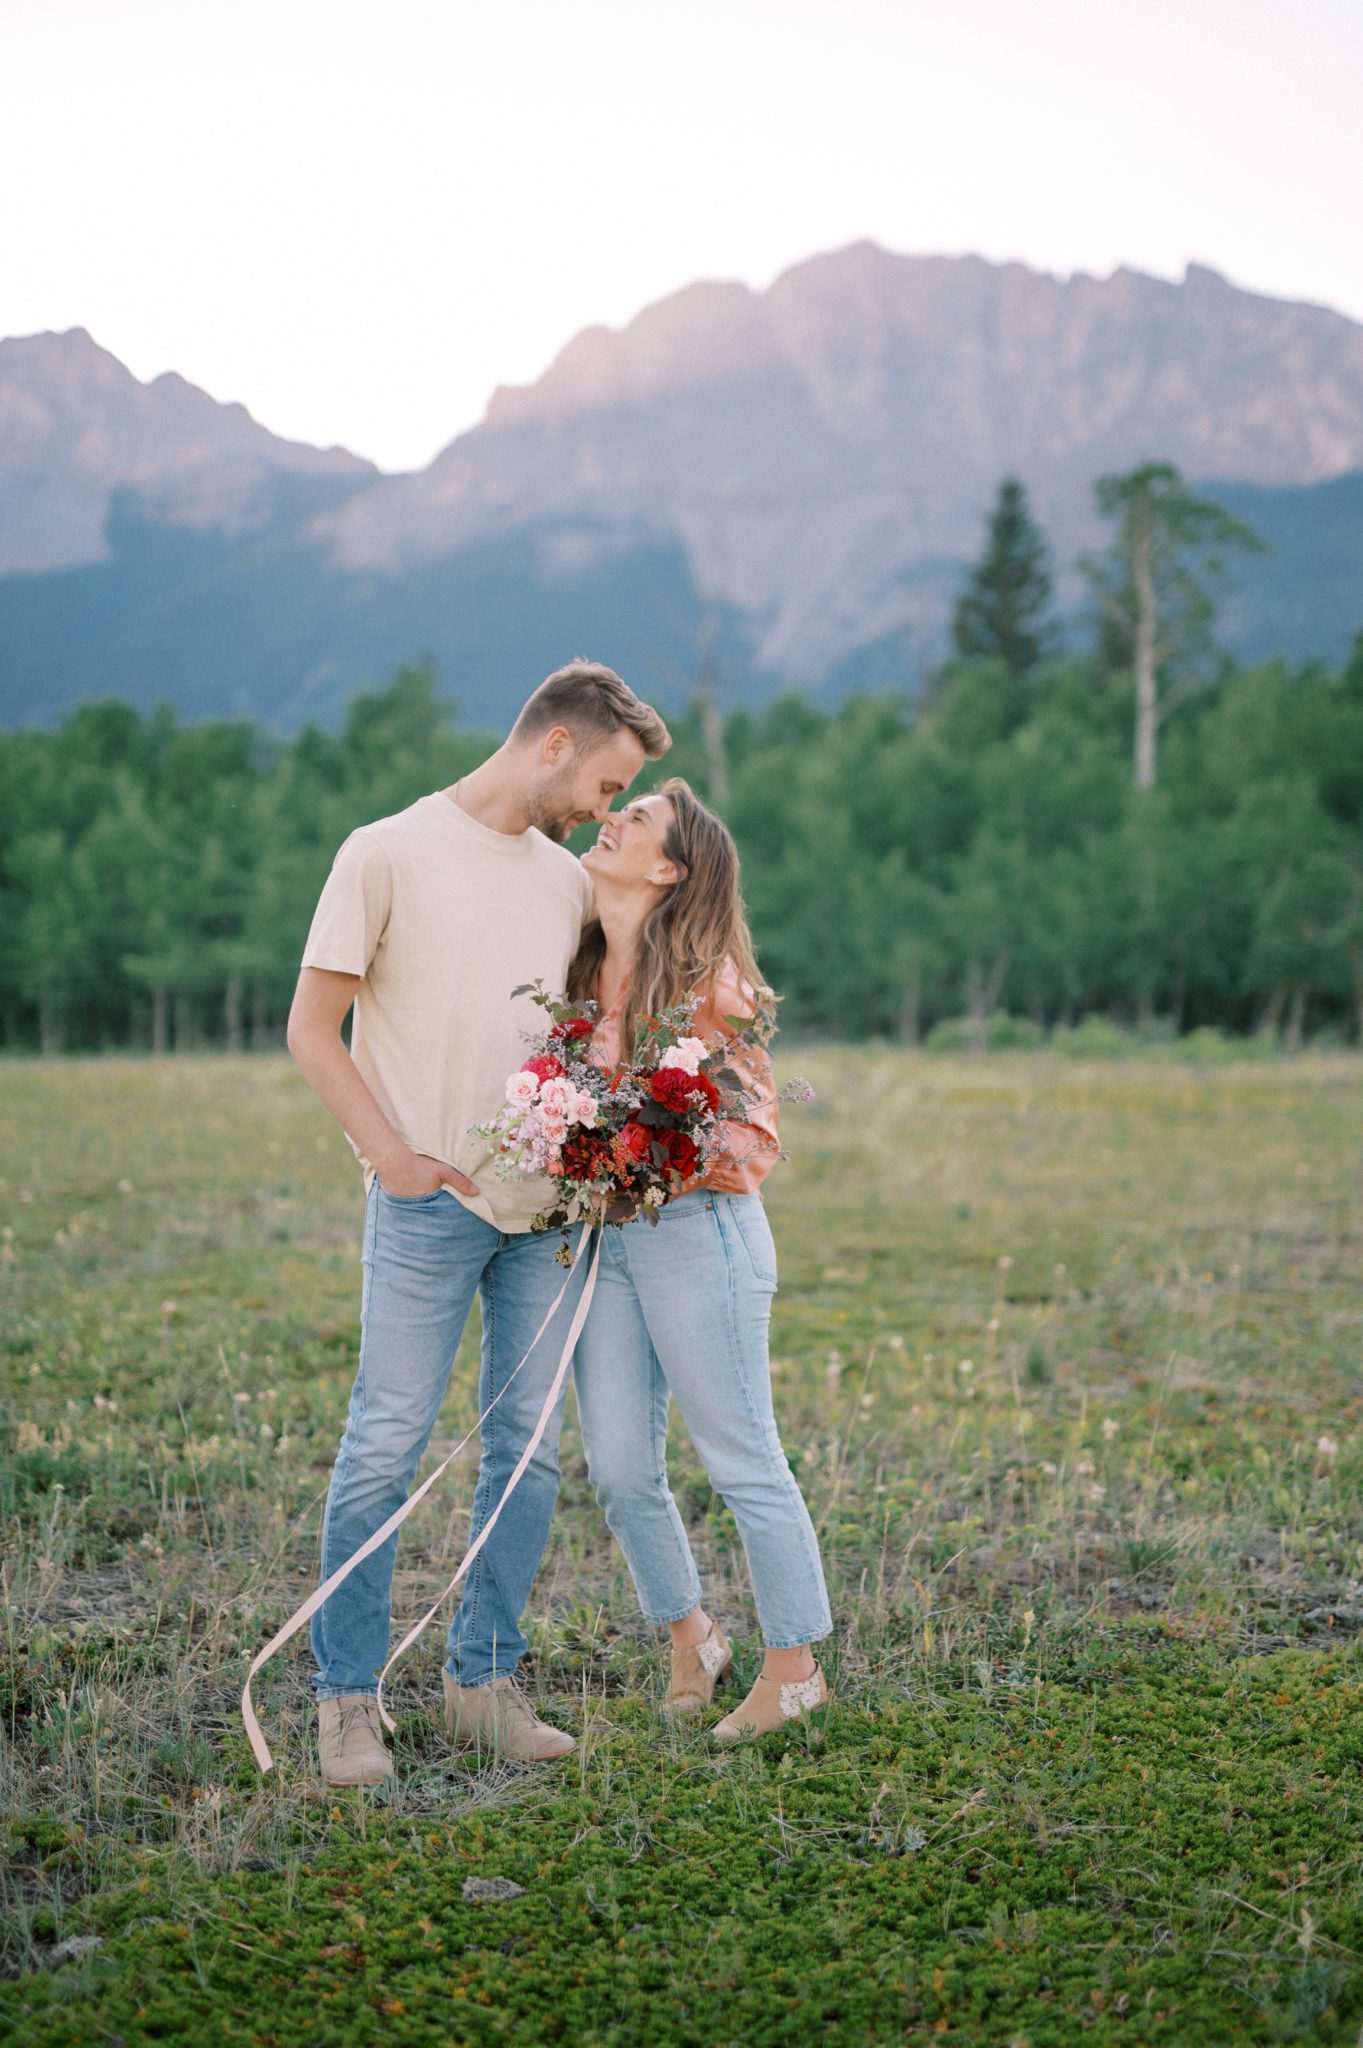 Couples session in the mountains with a vibrant bouquet